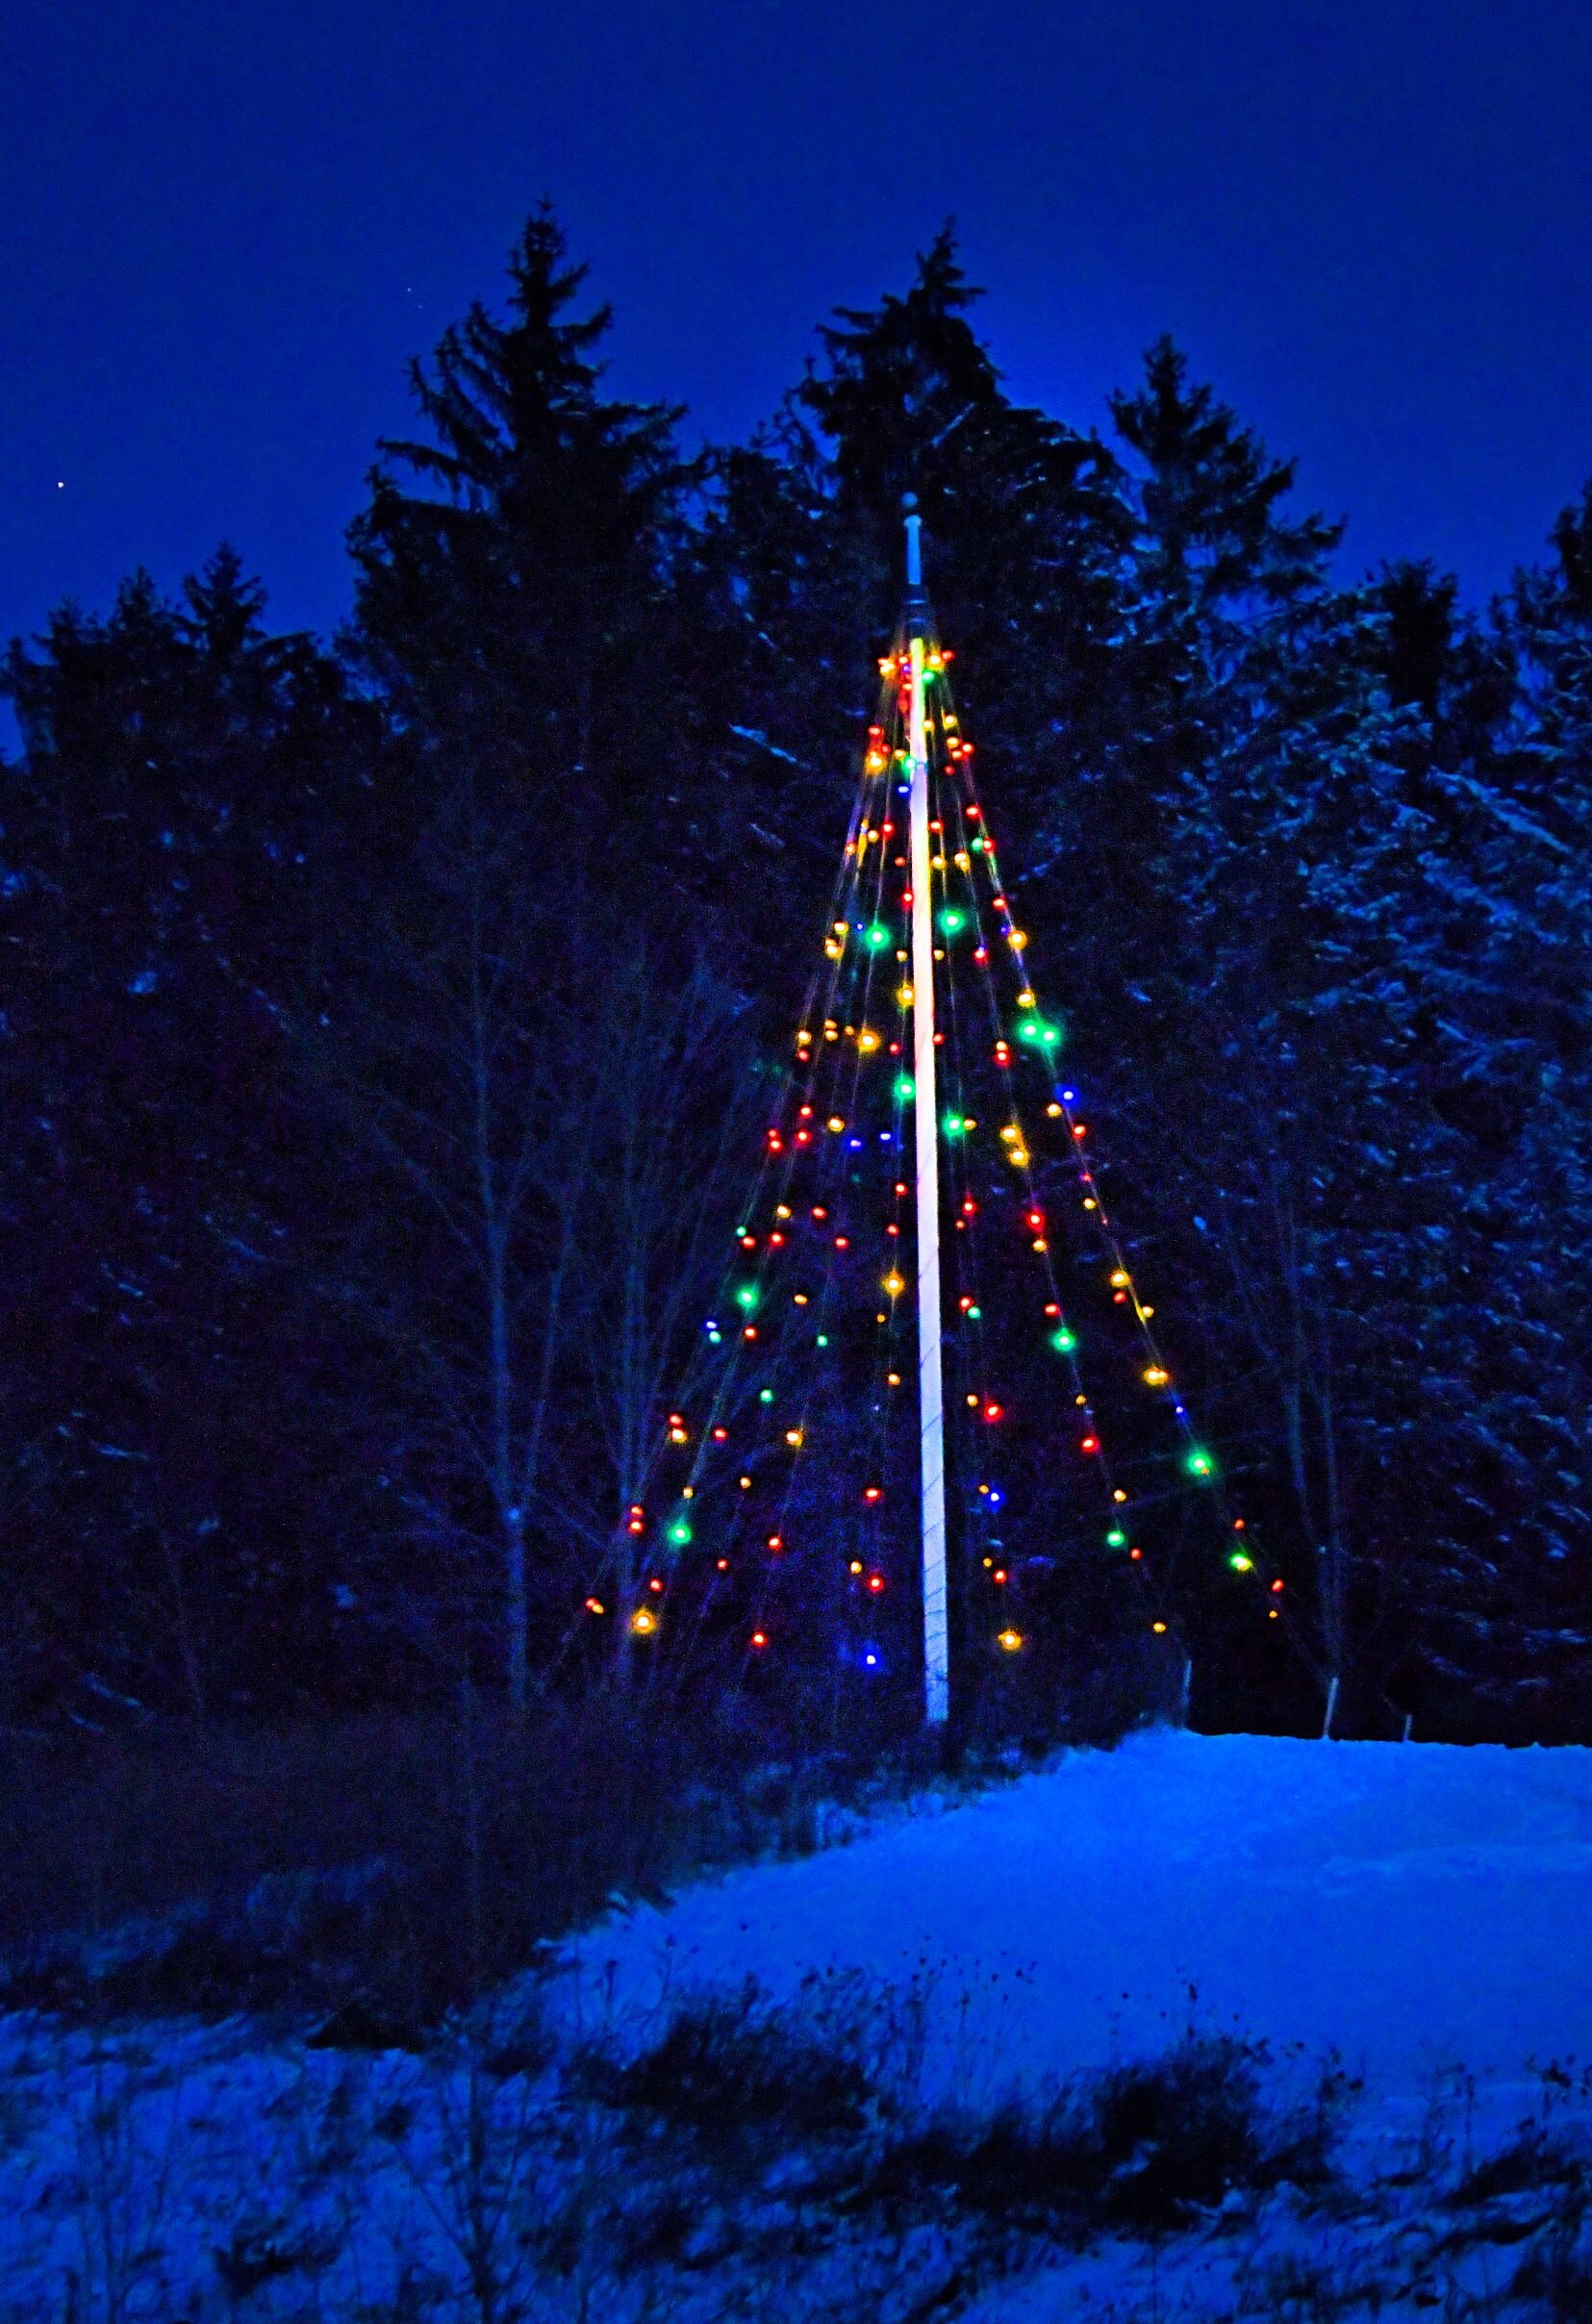   The “tree” is visible from many spots around town and especially Interstate 89’s off ramps. Photo by Gordon Miller.   